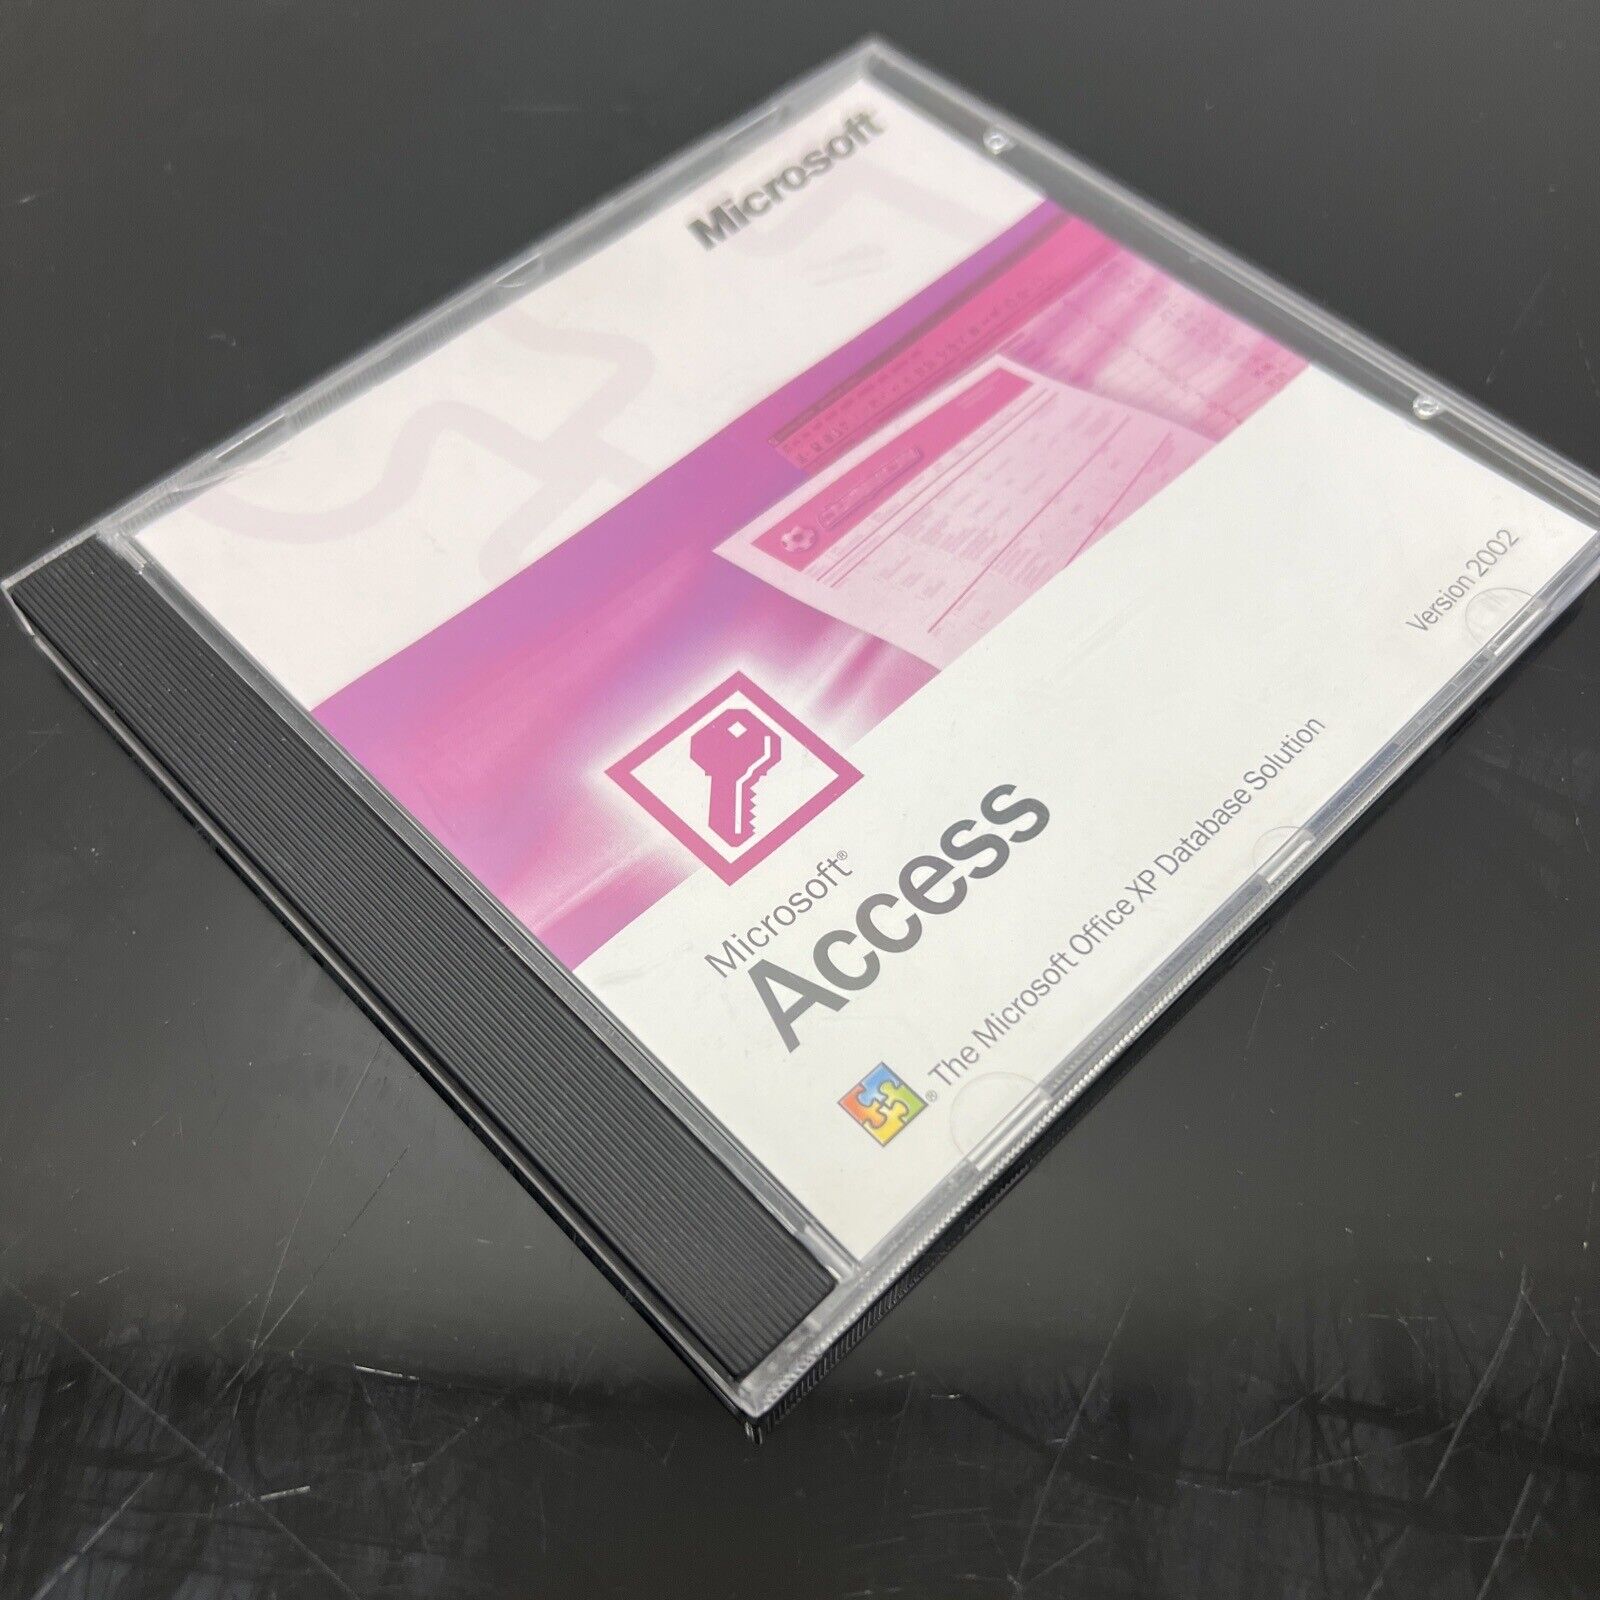 Microsoft Access 2002 Upgrade - Office XP Database Solution w/product key